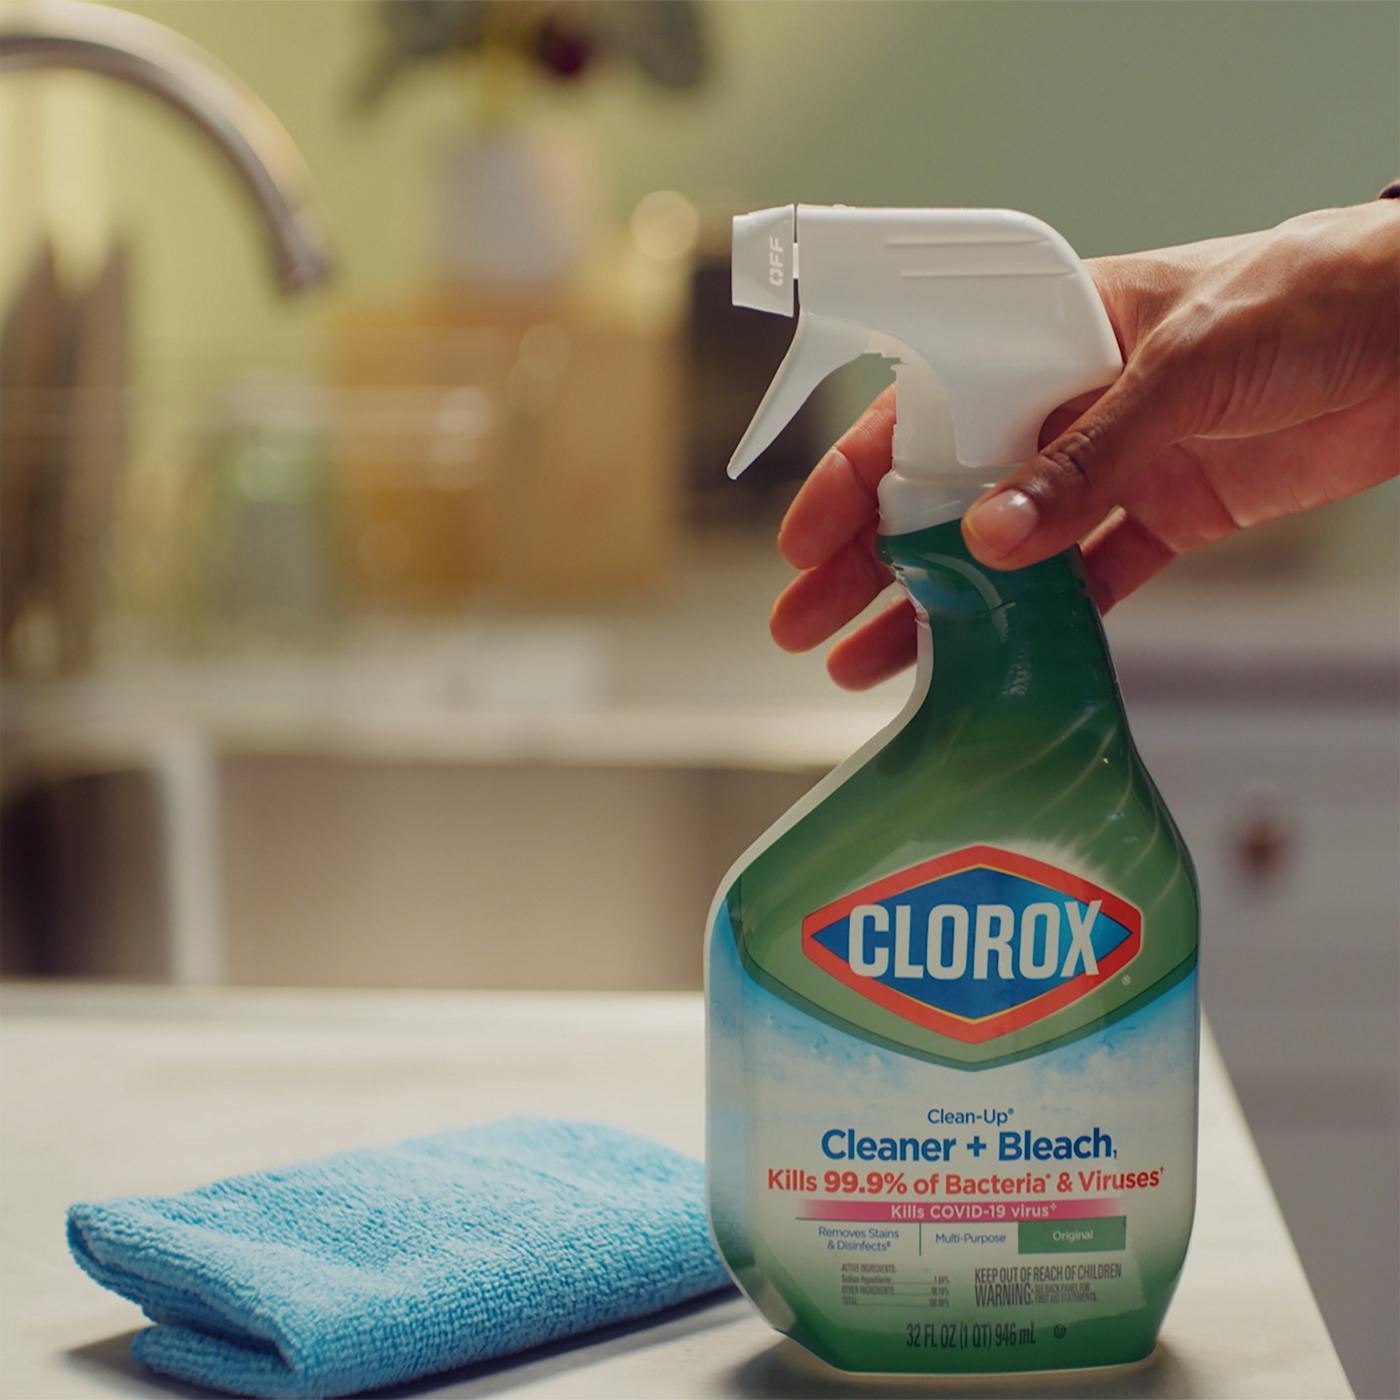 Clorox Clean-Up Cleaner & Bleach; image 5 of 13